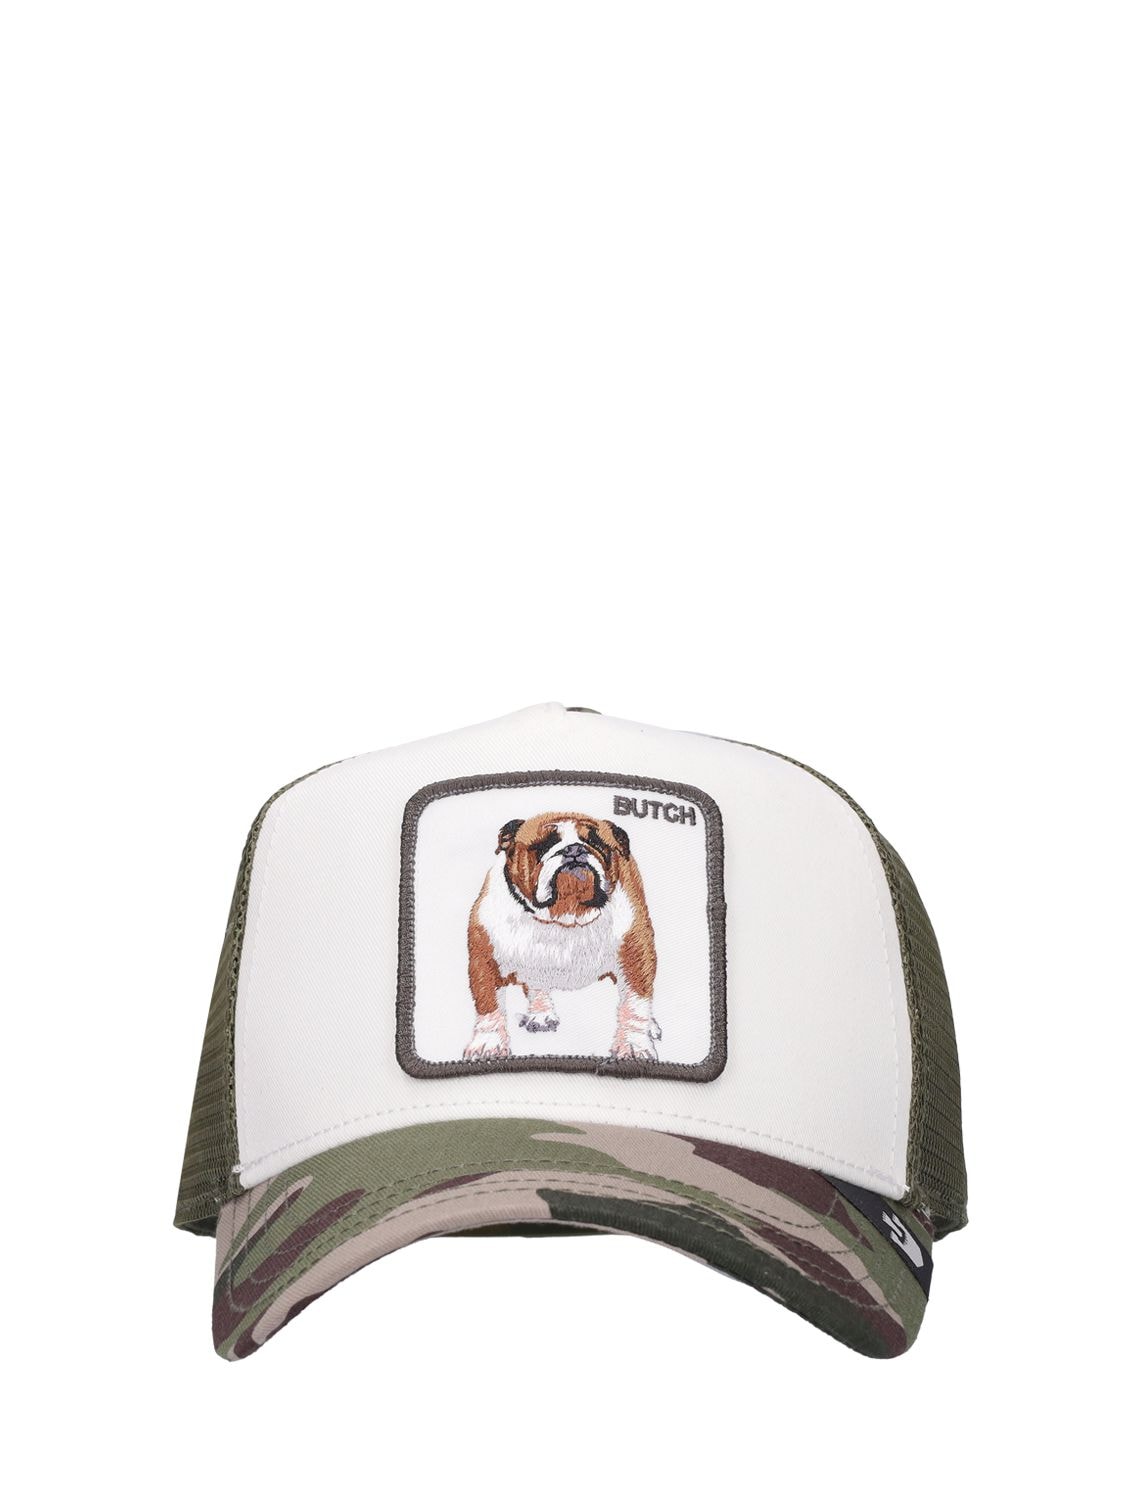 Image of The Butch Trucker Hat W/ Patch